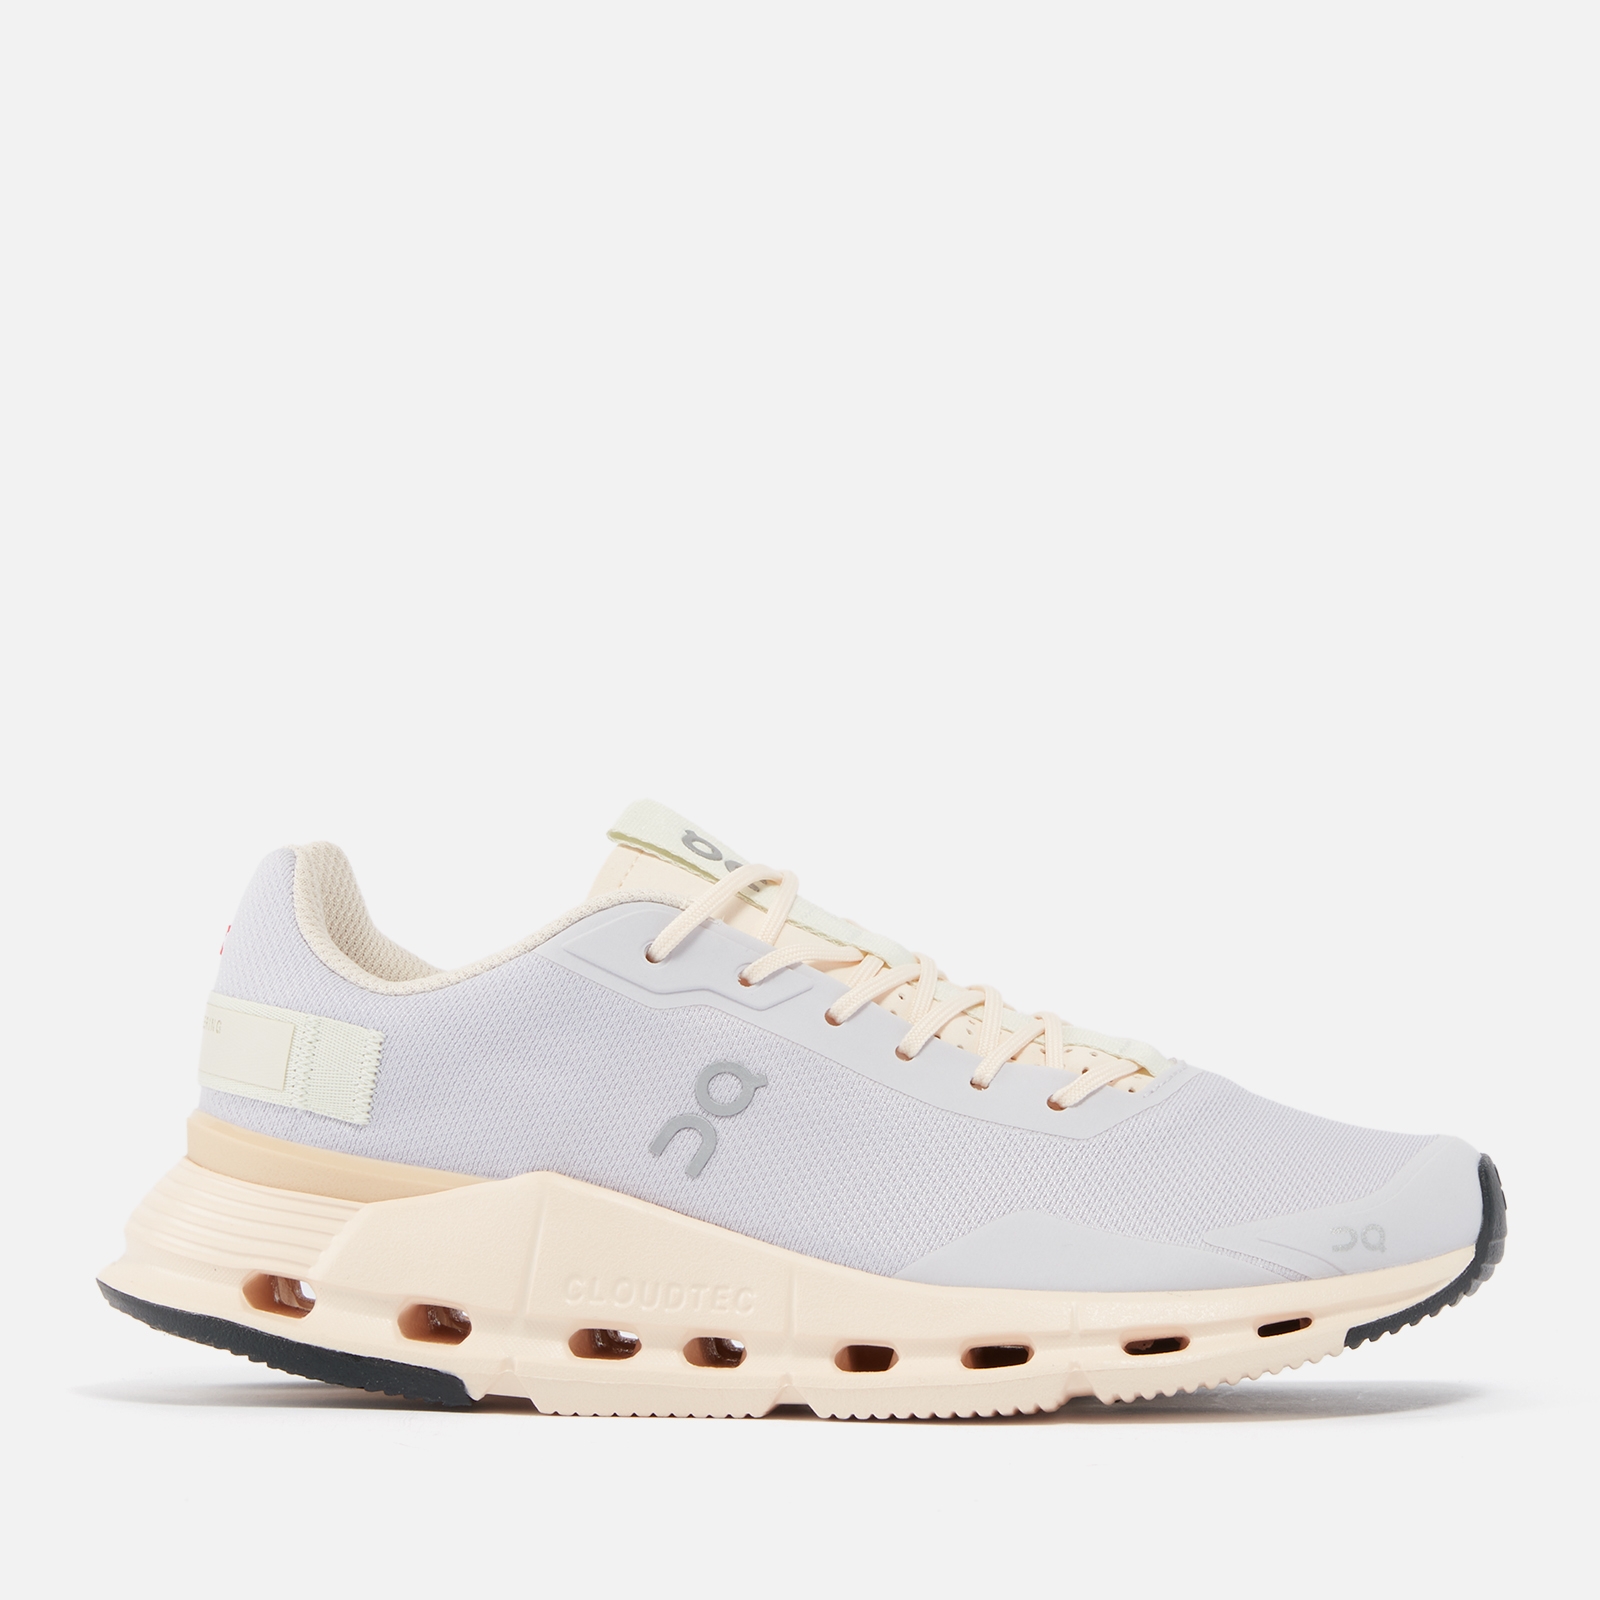 ON Women's Cloudnova Form Running Trainers - Lavender/Fawn - UK 3